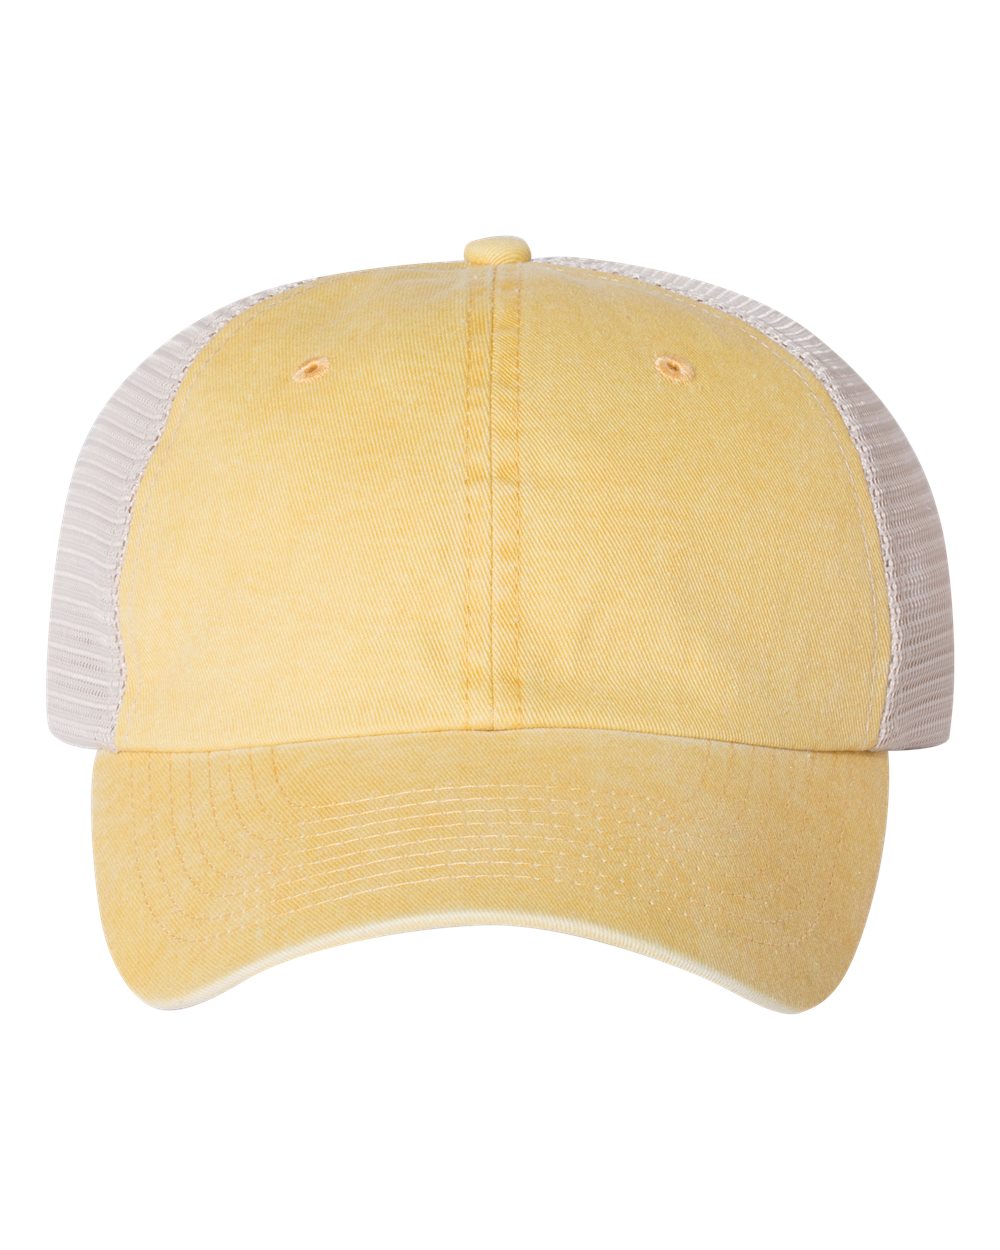 Sportsman Pigment-Dyed Trucker Cap SP510 #color_Mustard Yellow/ Stone